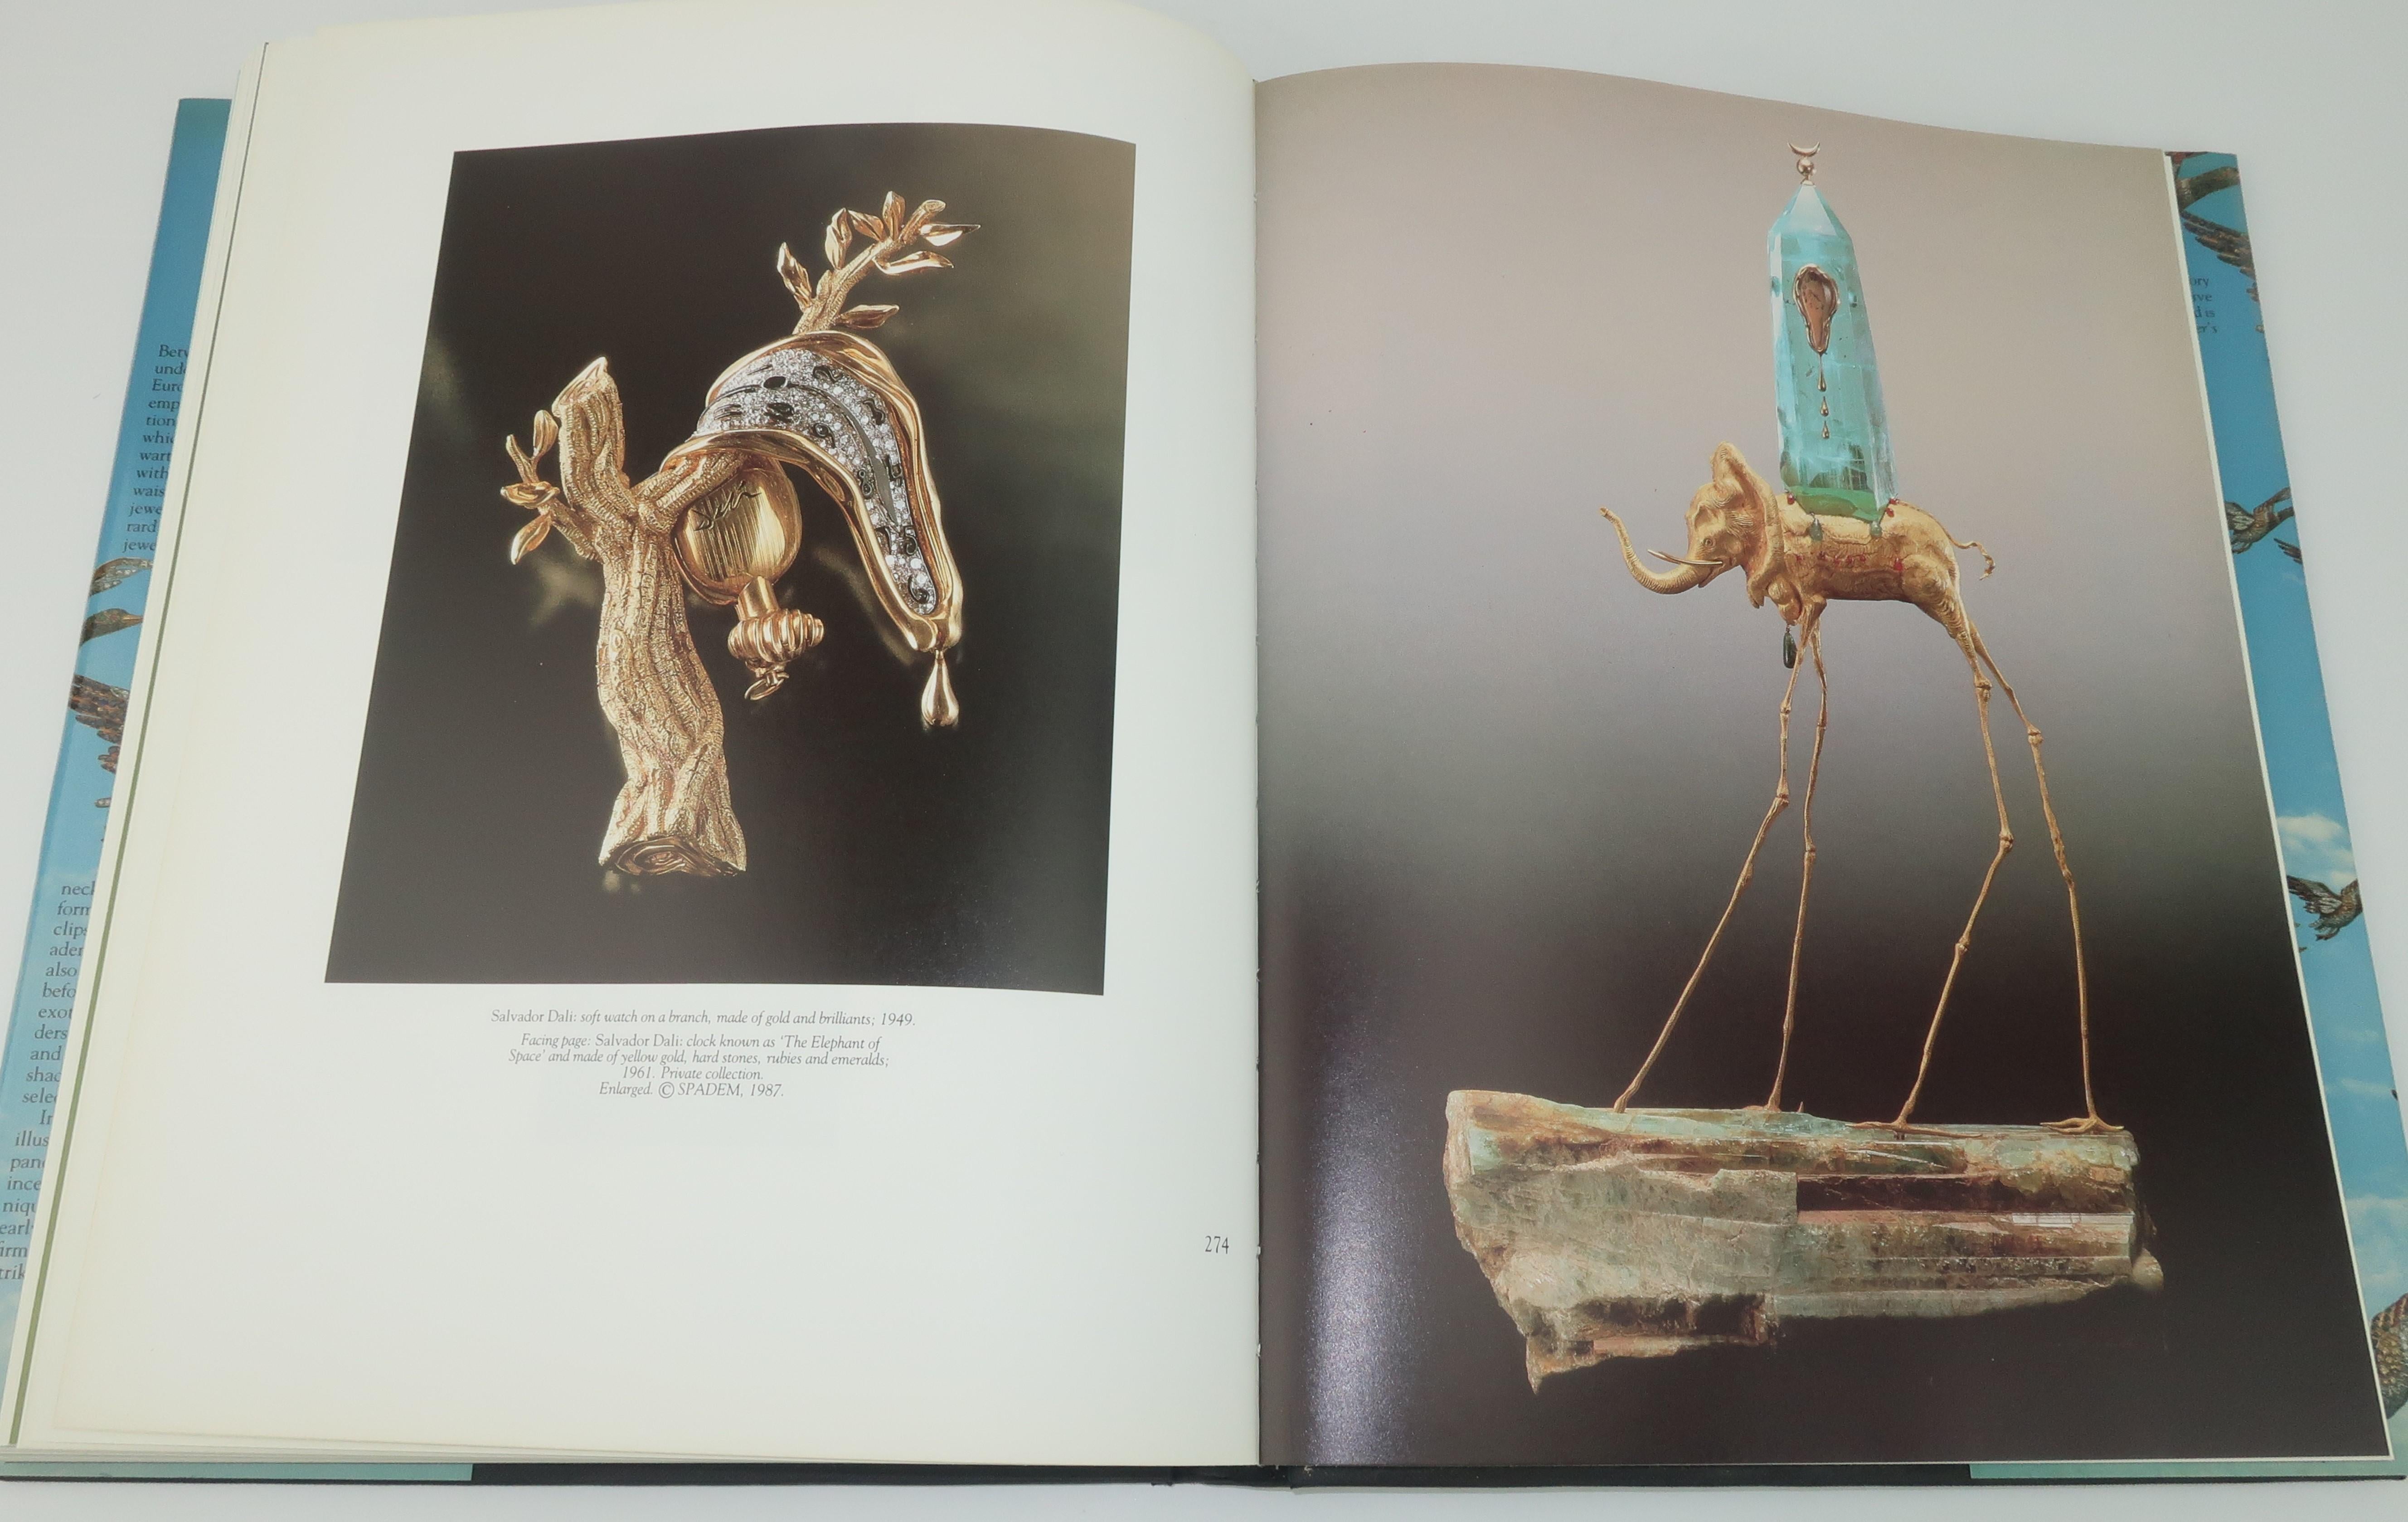 'Jewelry of the 1940s and 1950s' by Sylvie Raulet Collector's Coffee Table Book 6